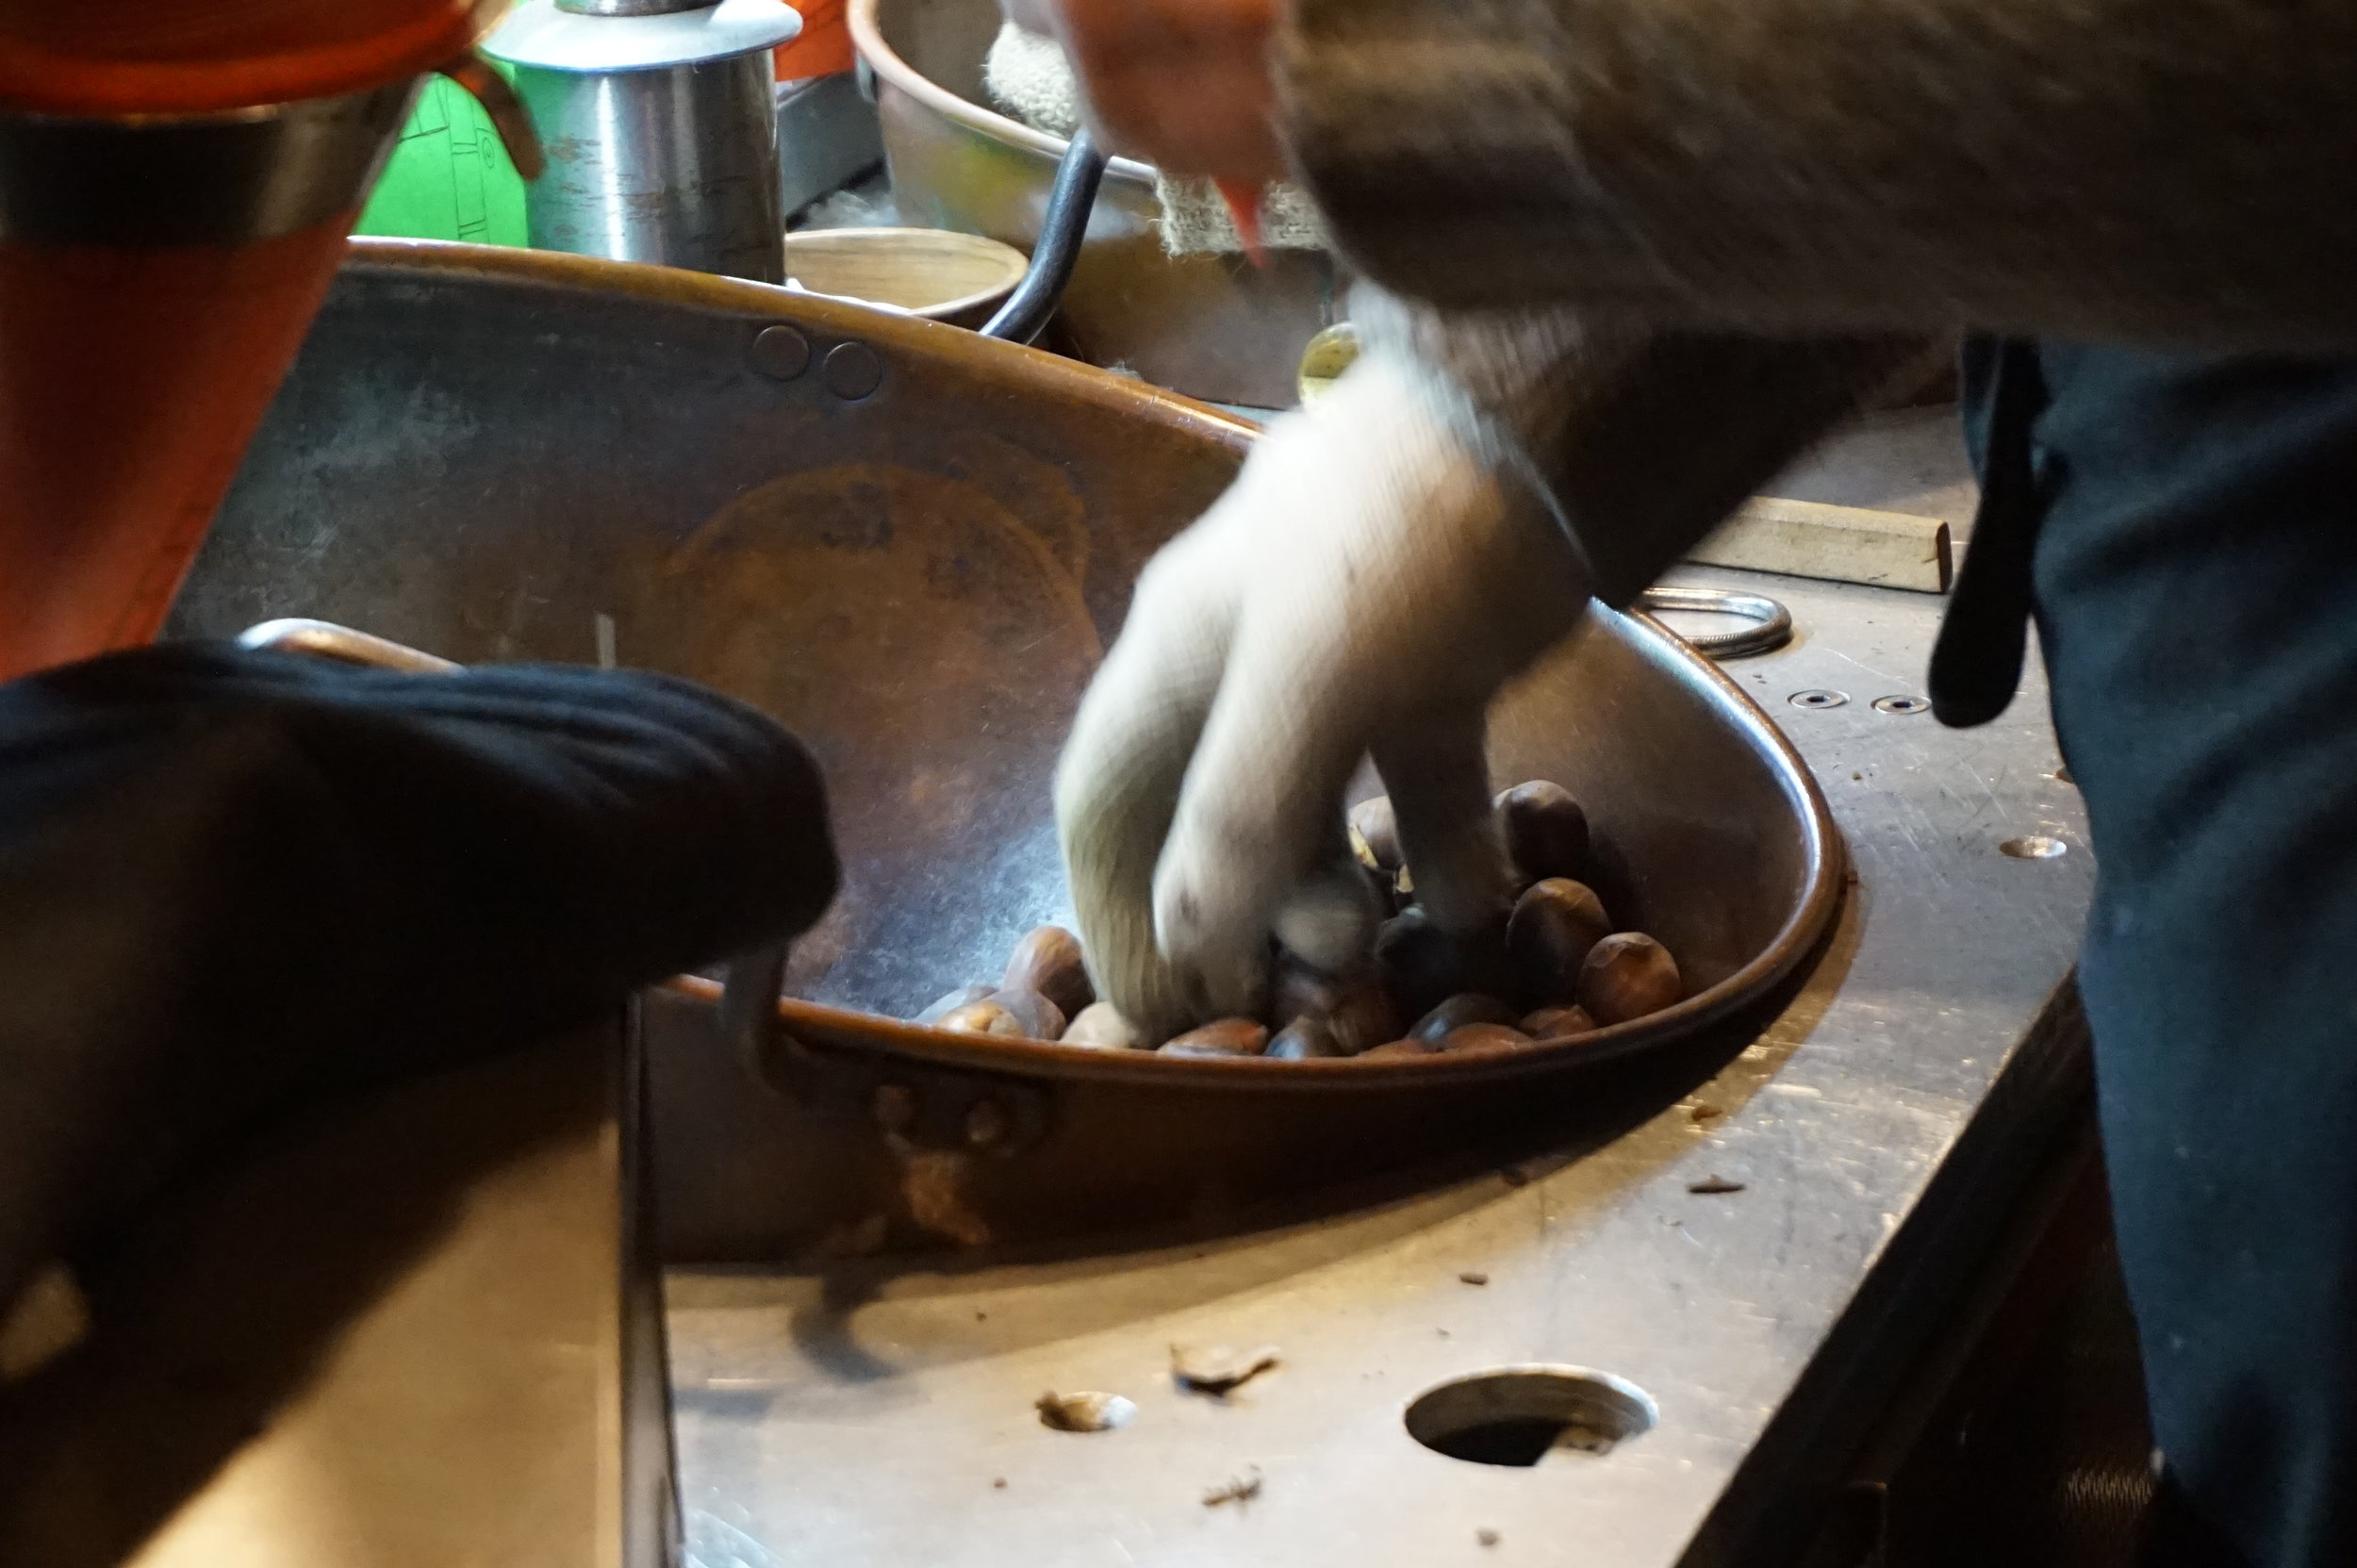  Roasted chestnuts are a speciality at a Christmas market 